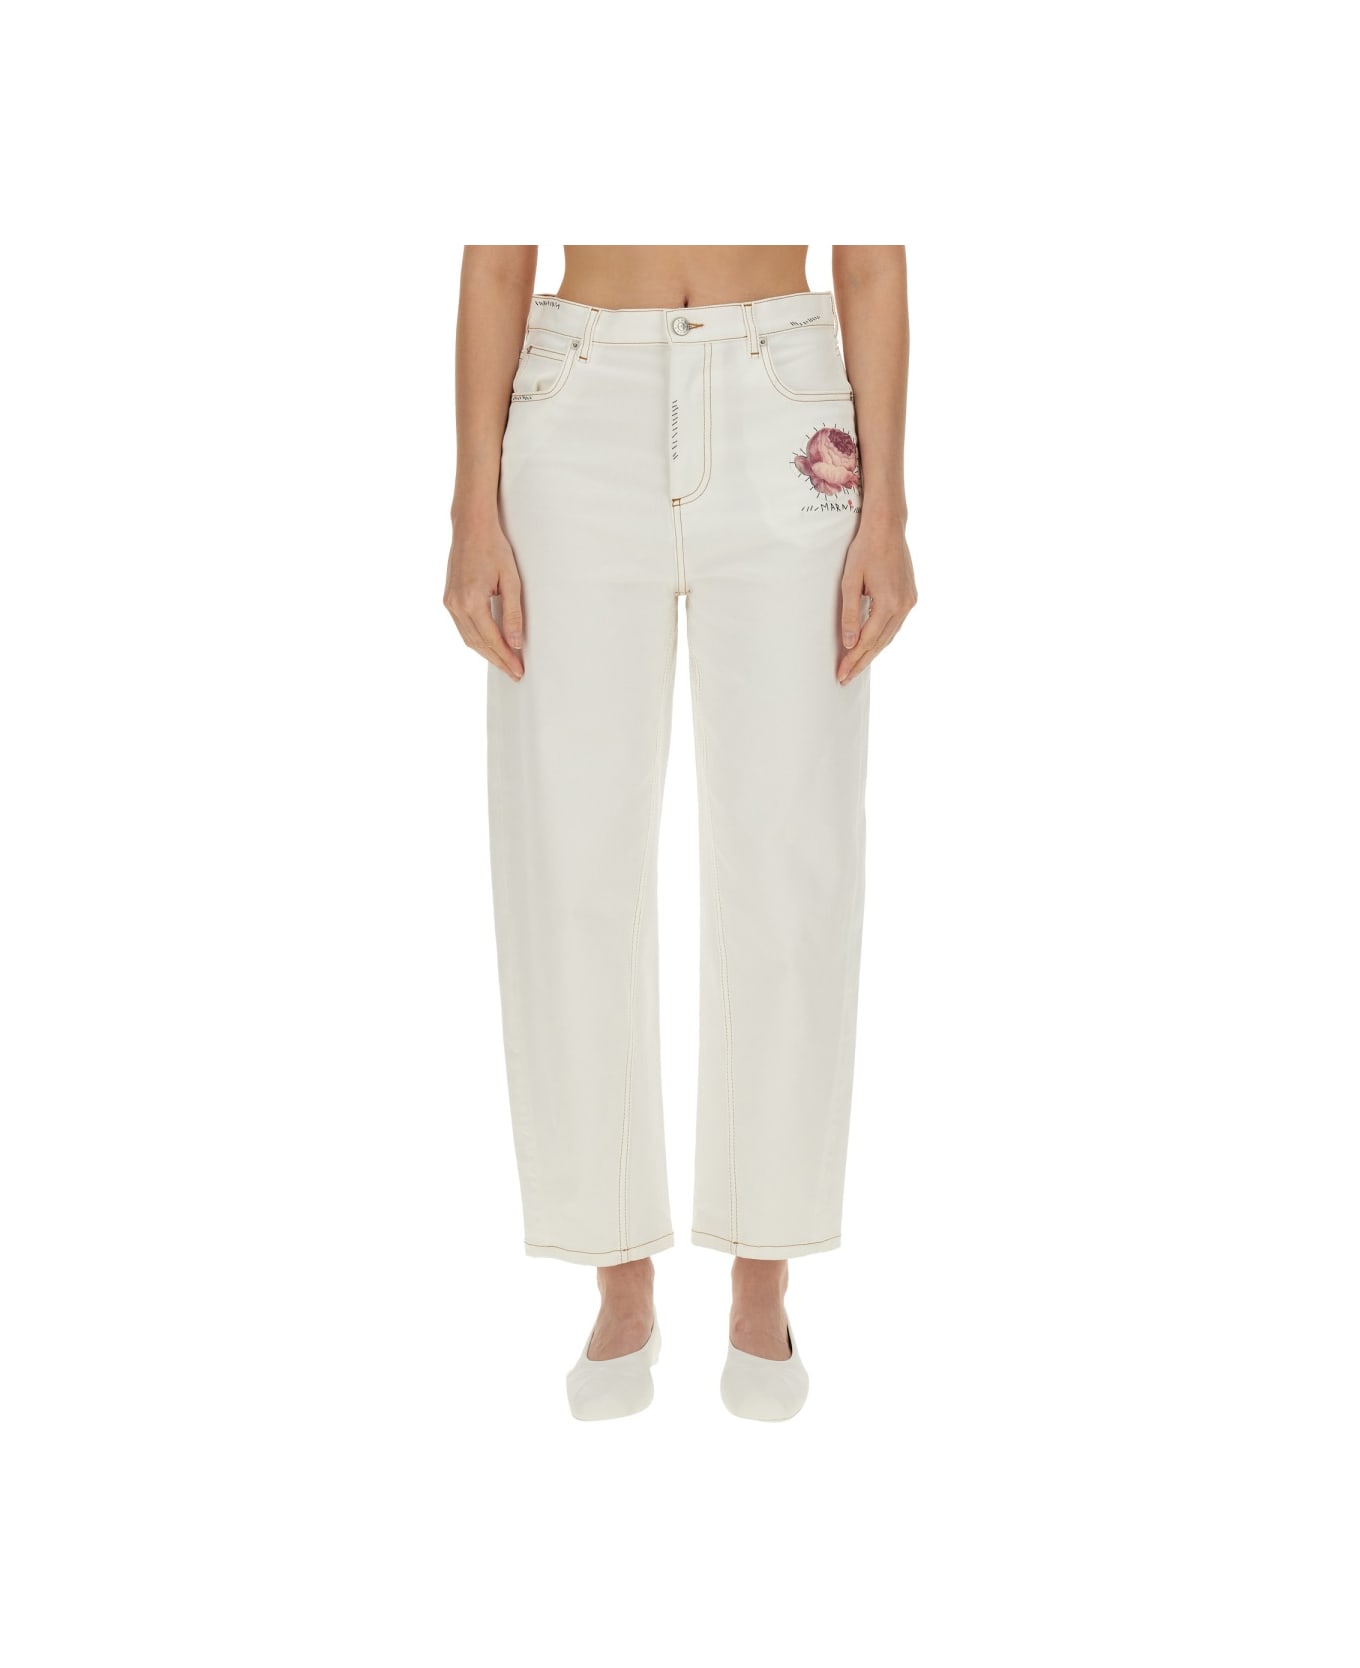 Marni Pants With Flower Appliqué - WHITE